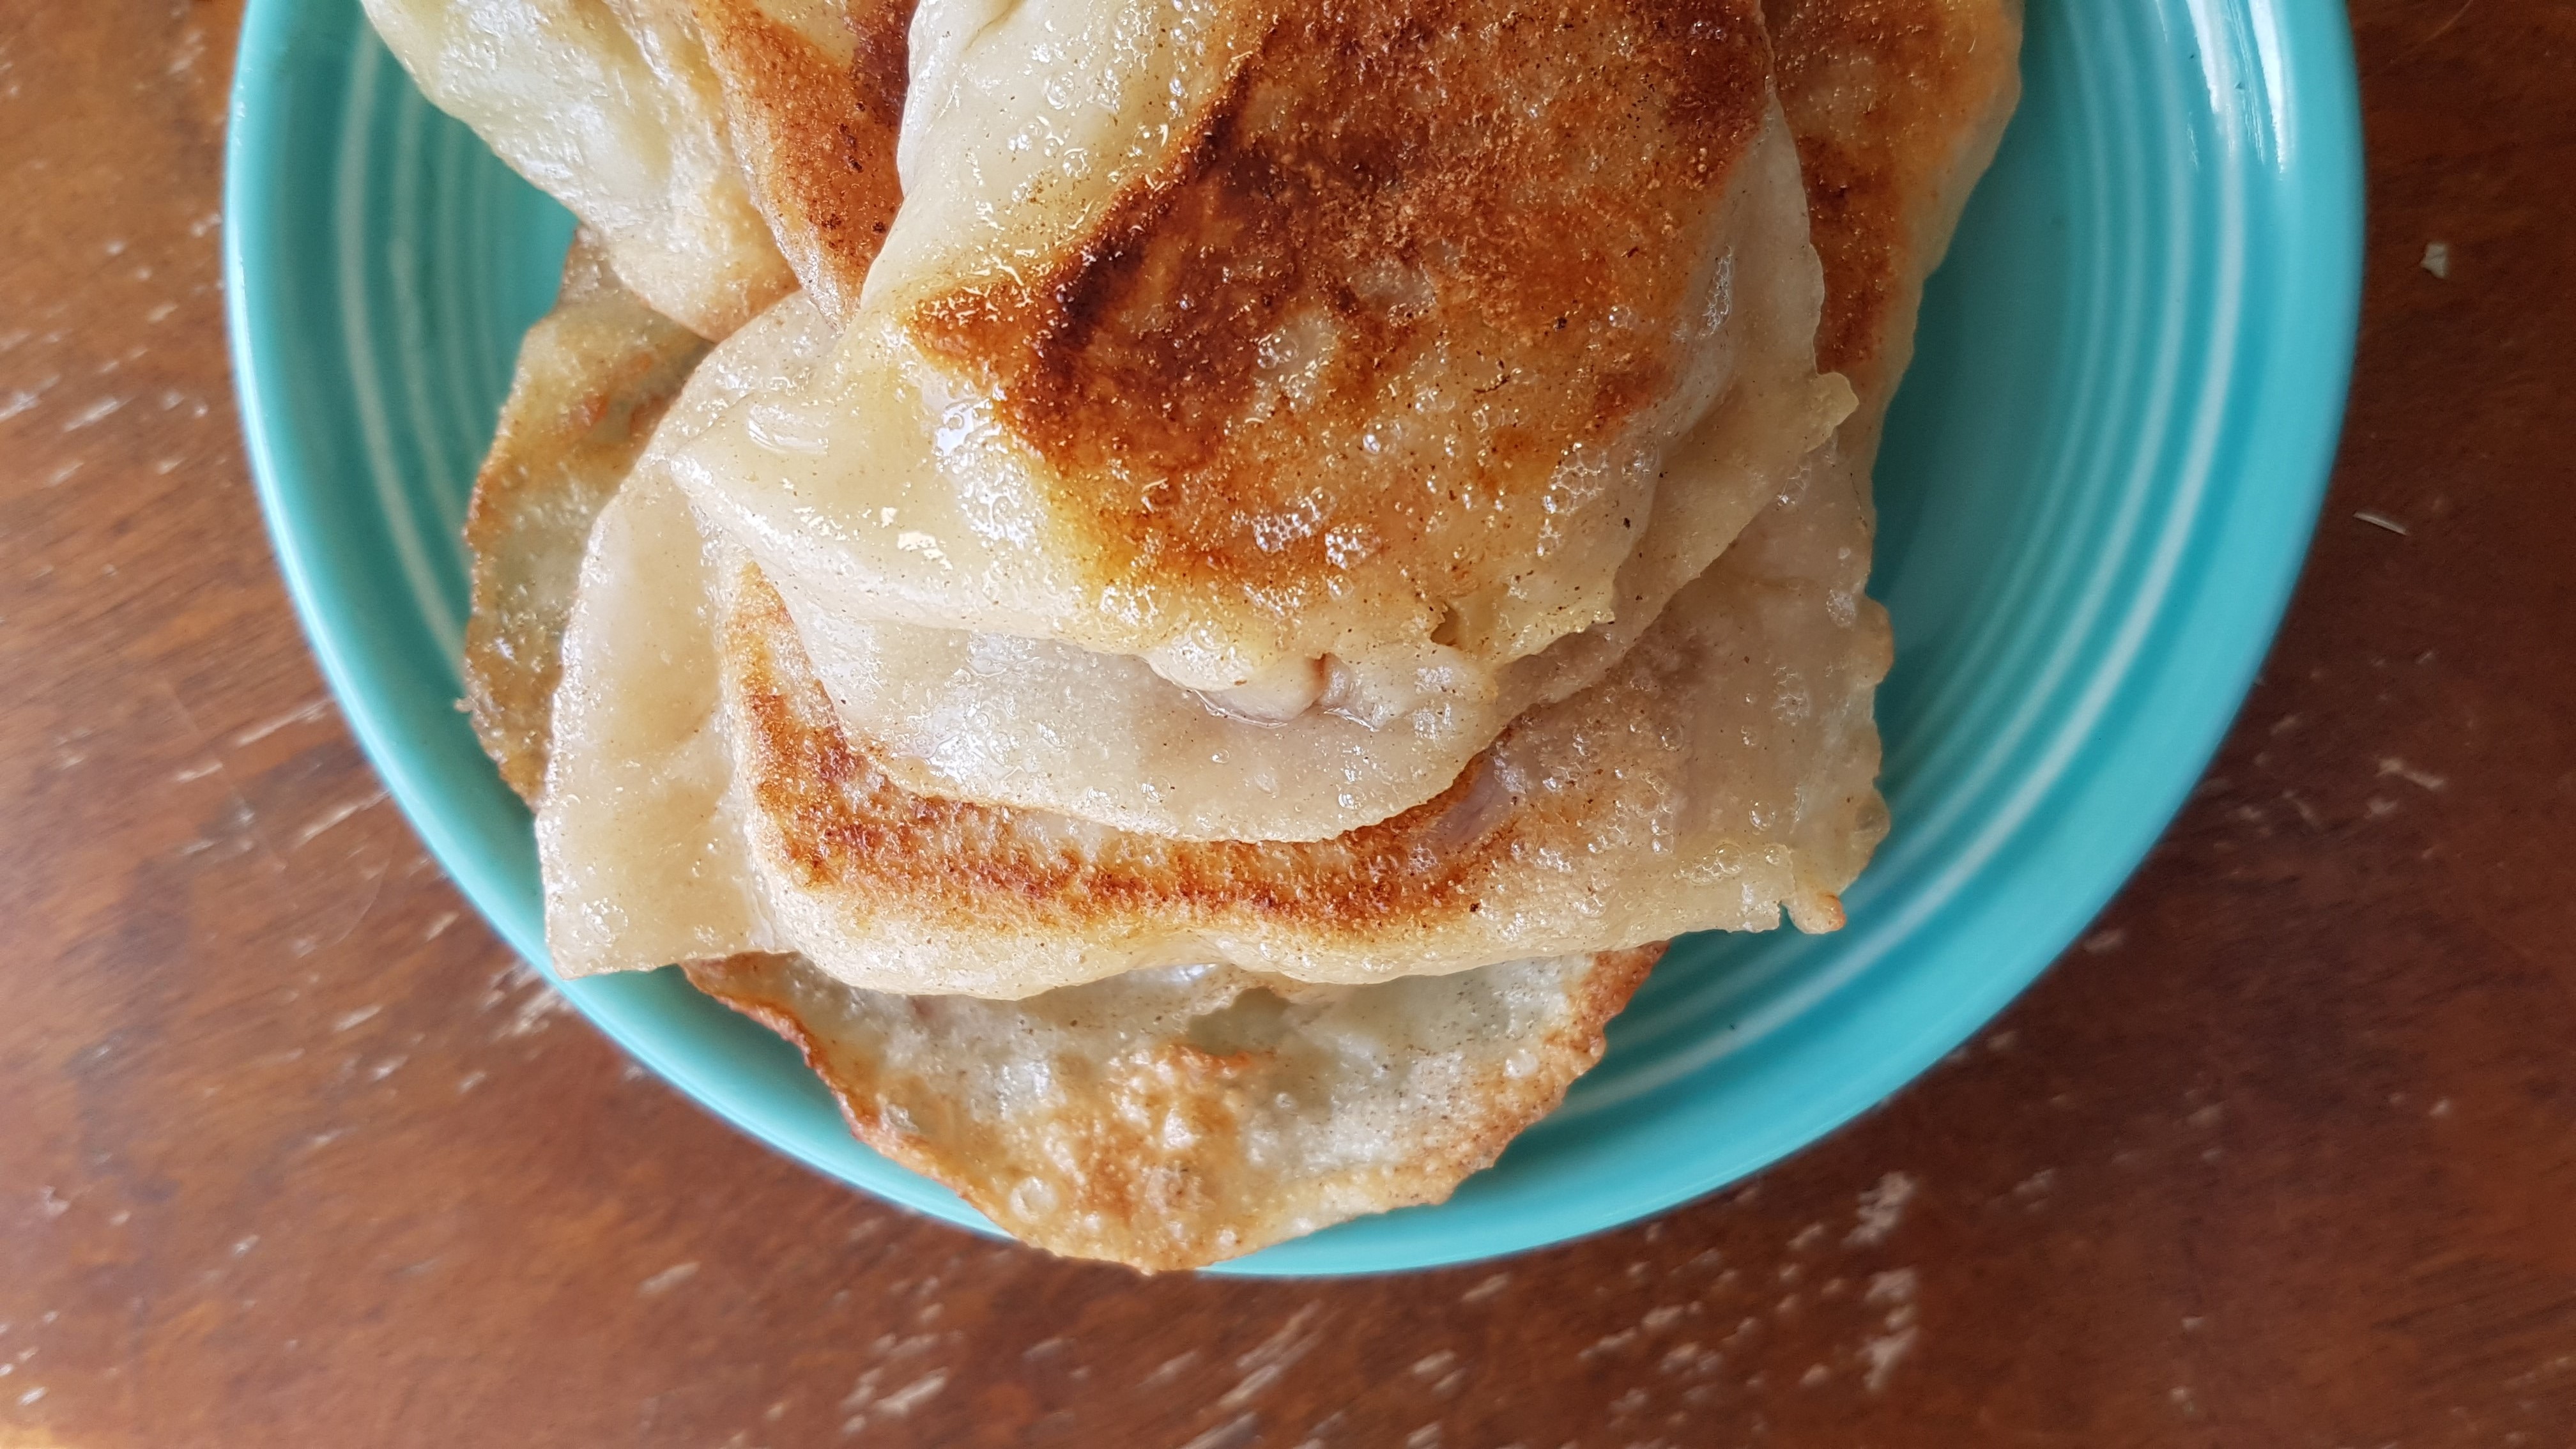 The pierogies are calling in reinforcements!